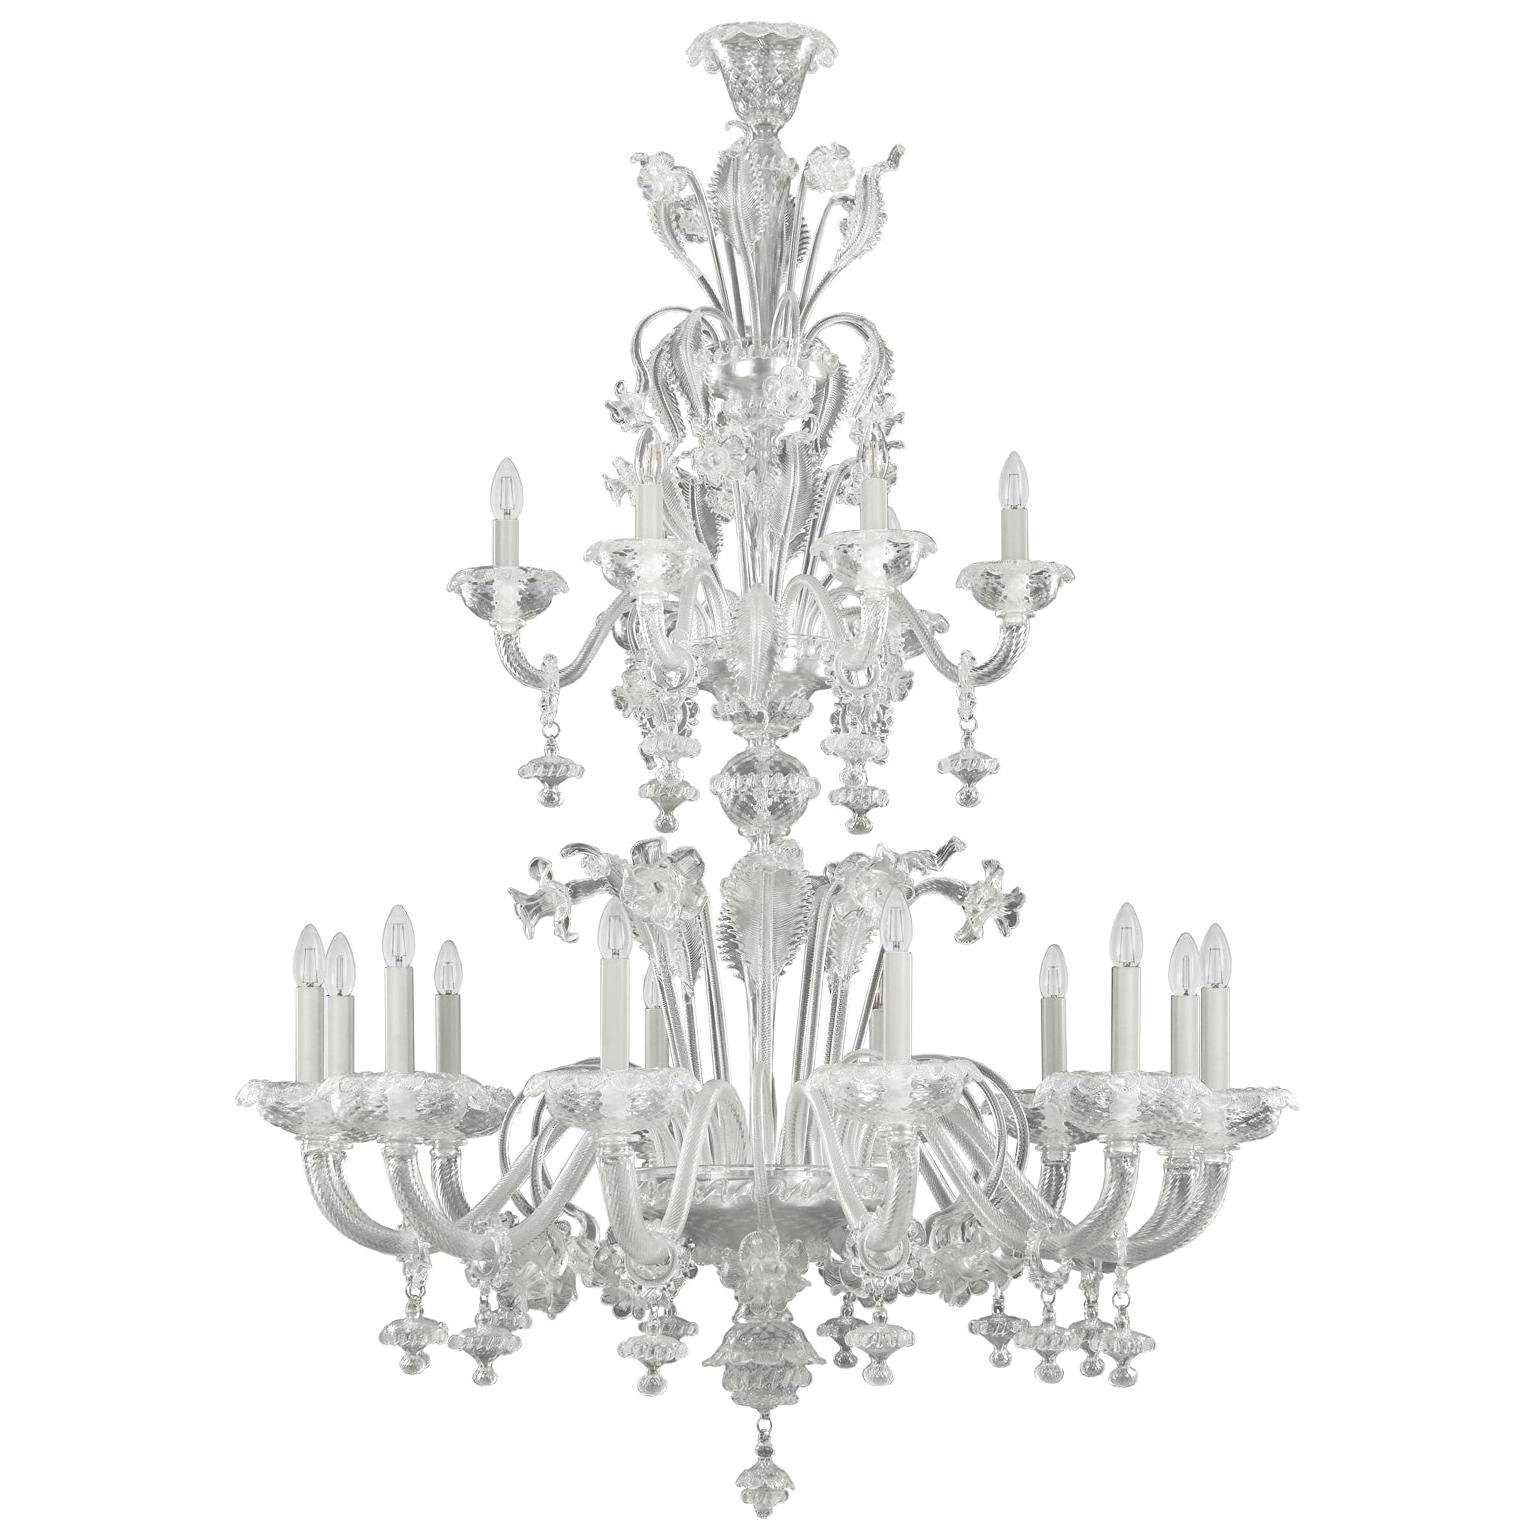 Venetian Chandelier 12+6 arms artistic Crystal Glass Caesar by Multiforme For Sale